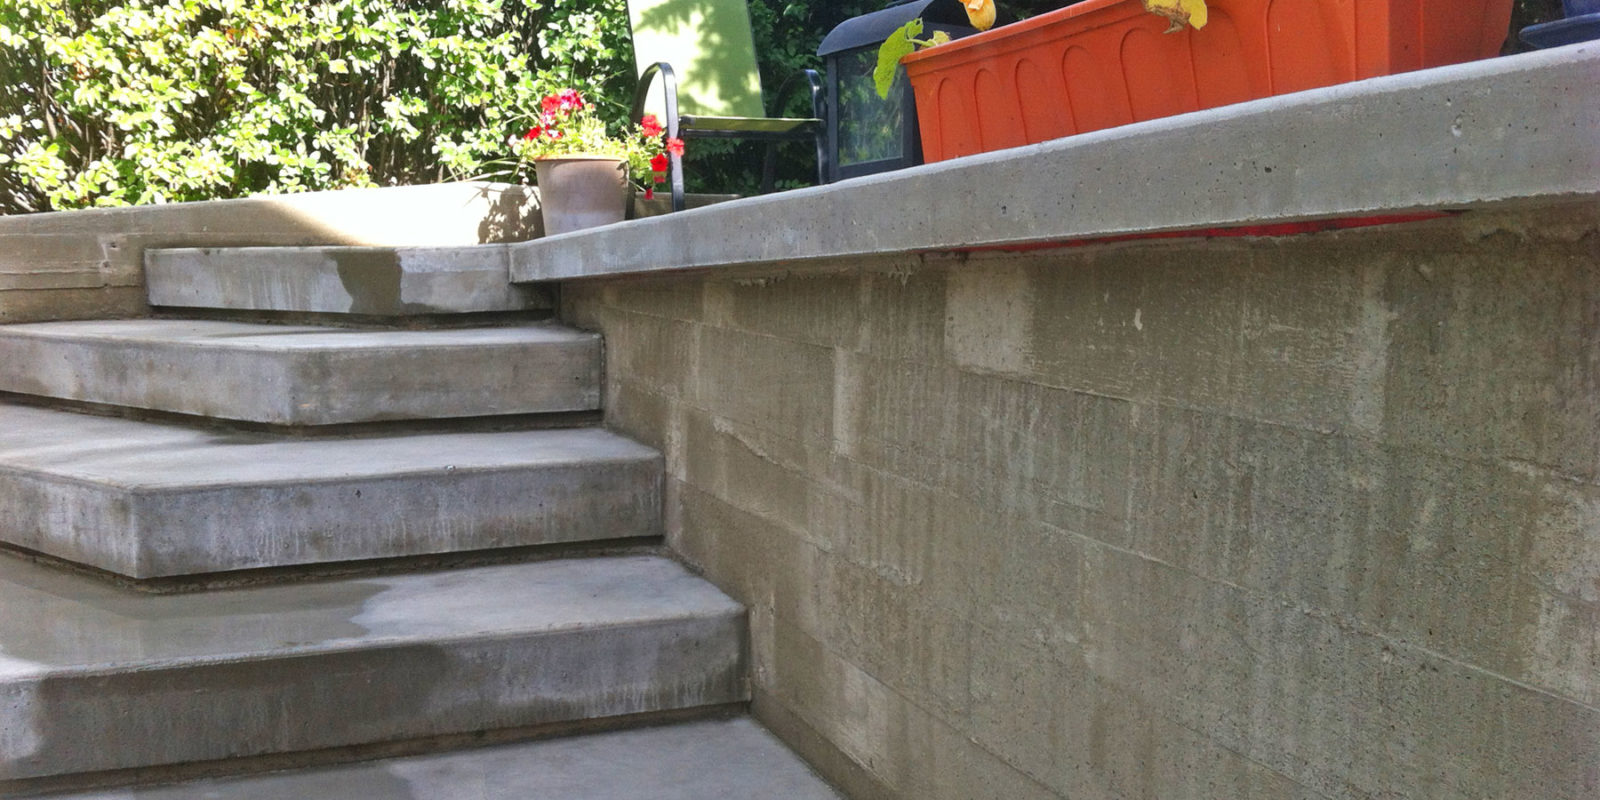 Residential concrete by Competition Concrete, Canmore, Calgary and Bow Valley area